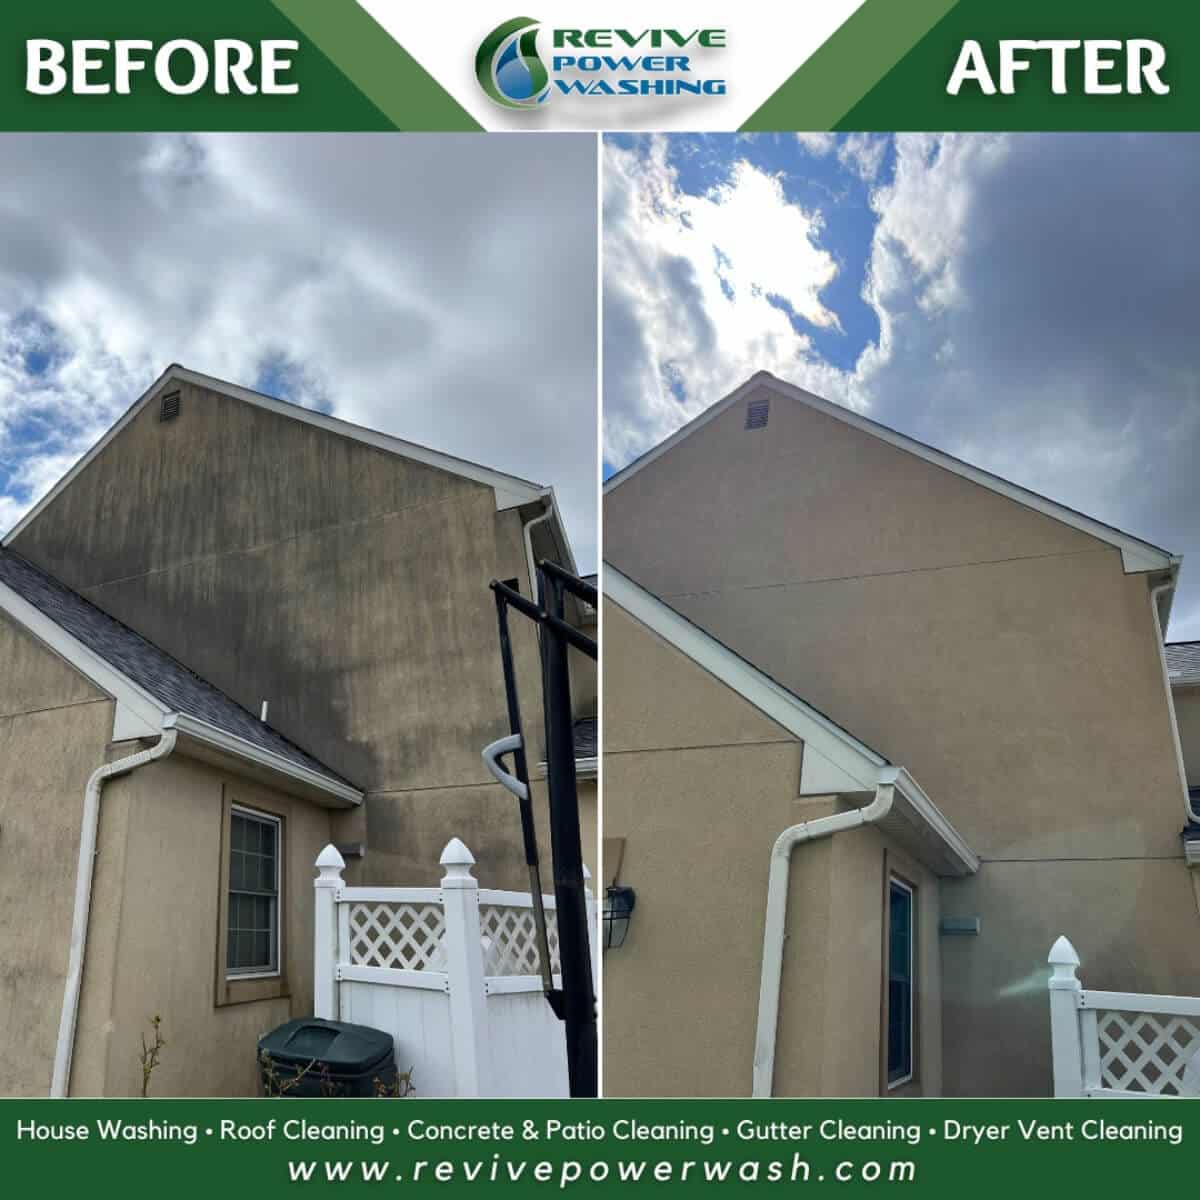 before and after comparison of house washing service in bethlehem pa